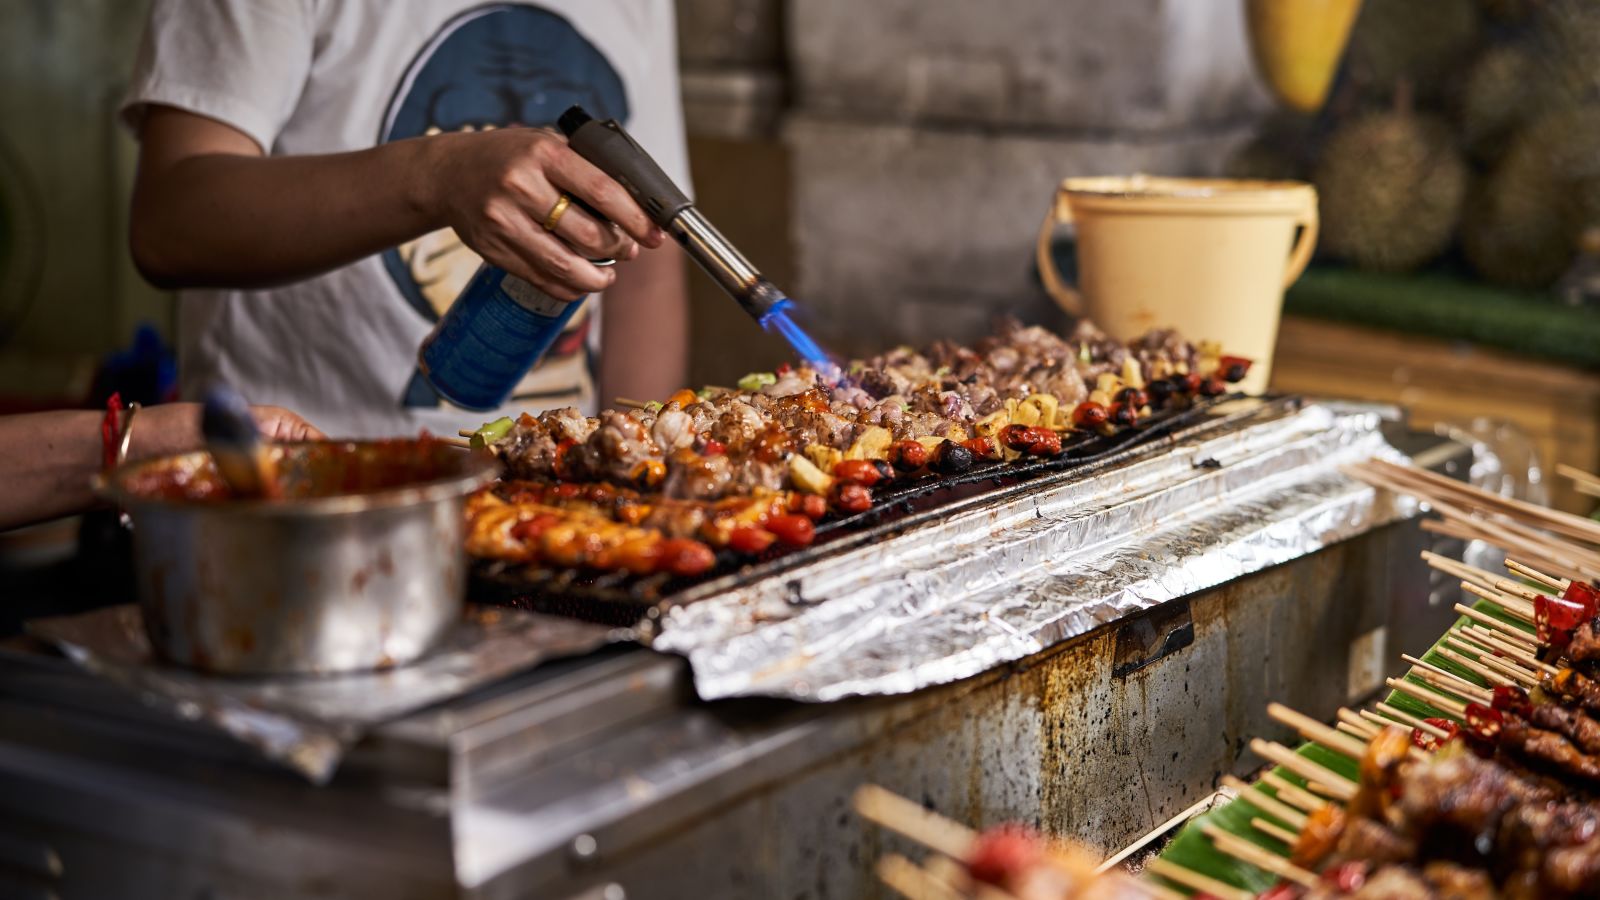 A street food vendor frying meat that is lined up in skewers